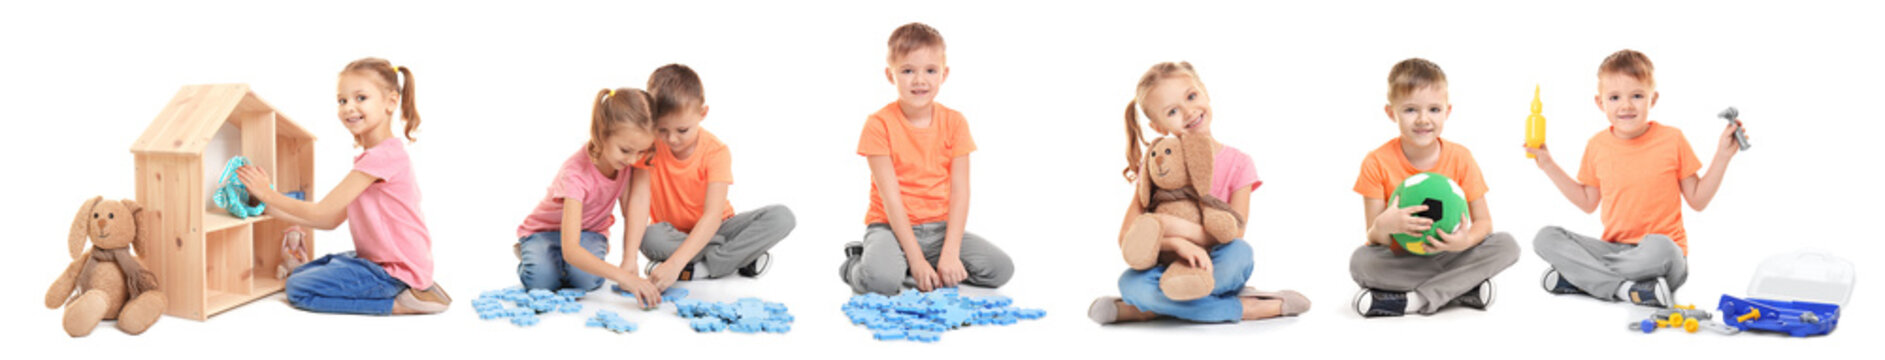 Collage of happy little children playing with different toys on white background